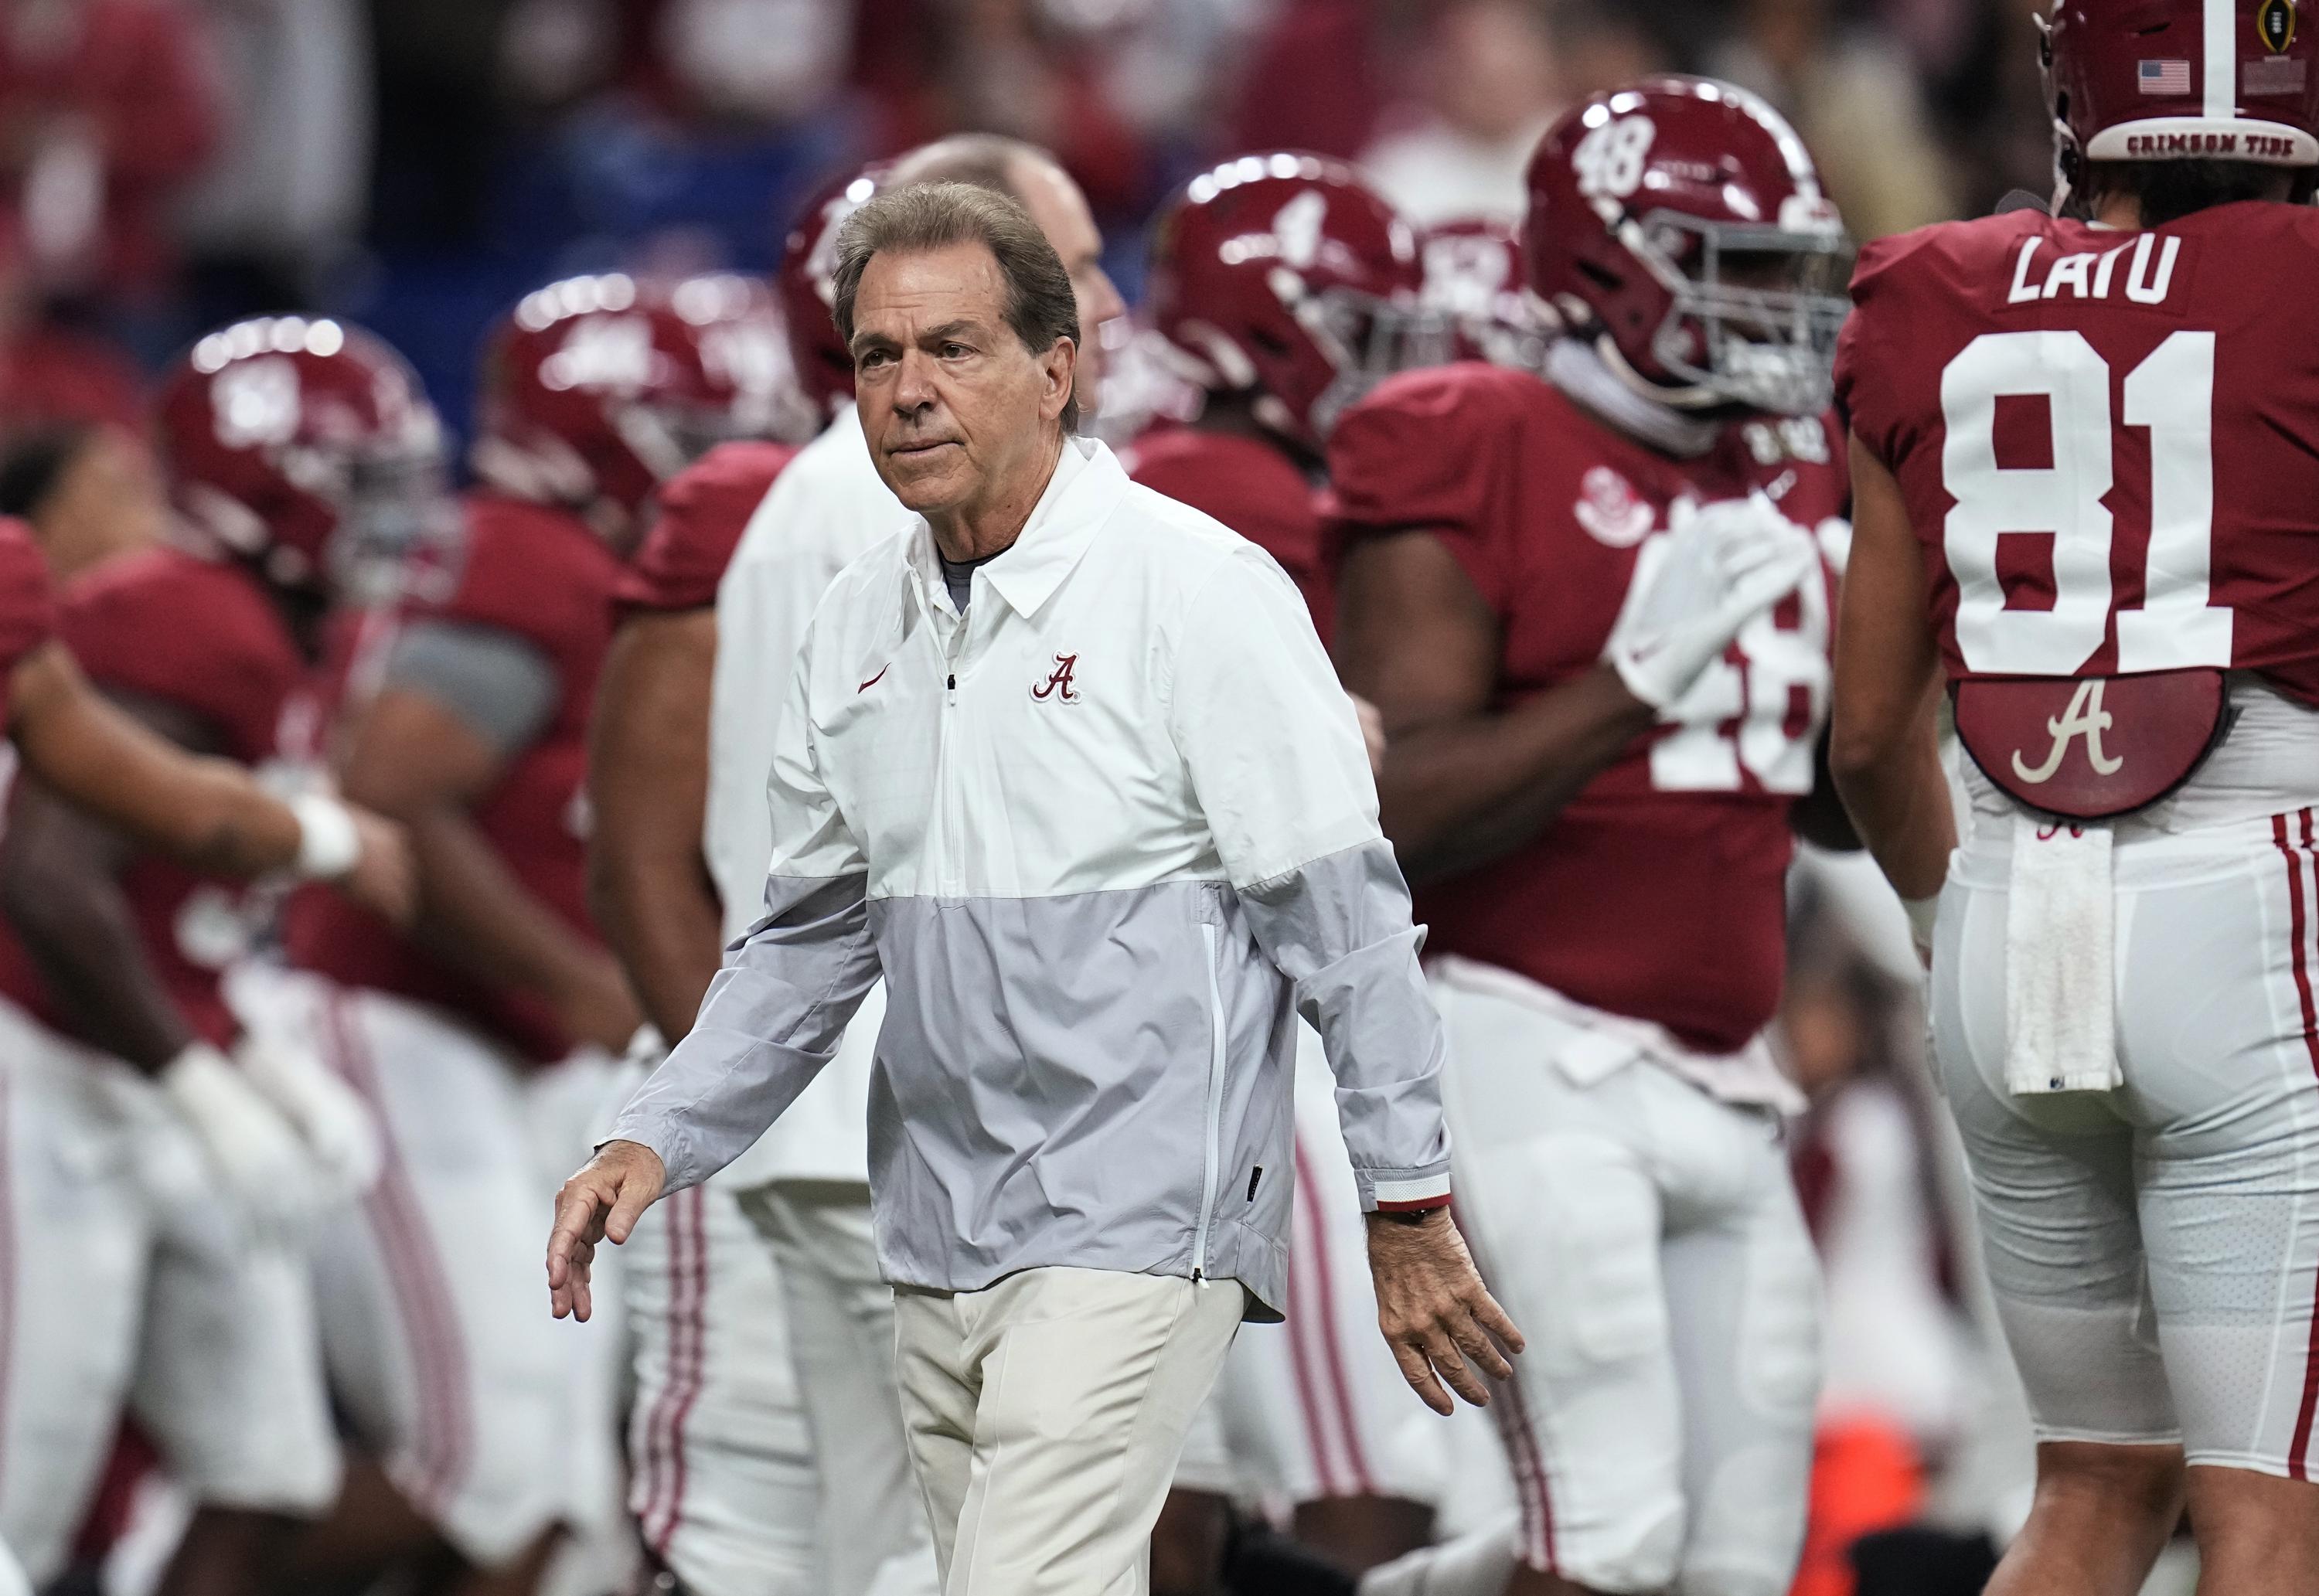 Saban: Current state of college football not 'sustainable' | AP News